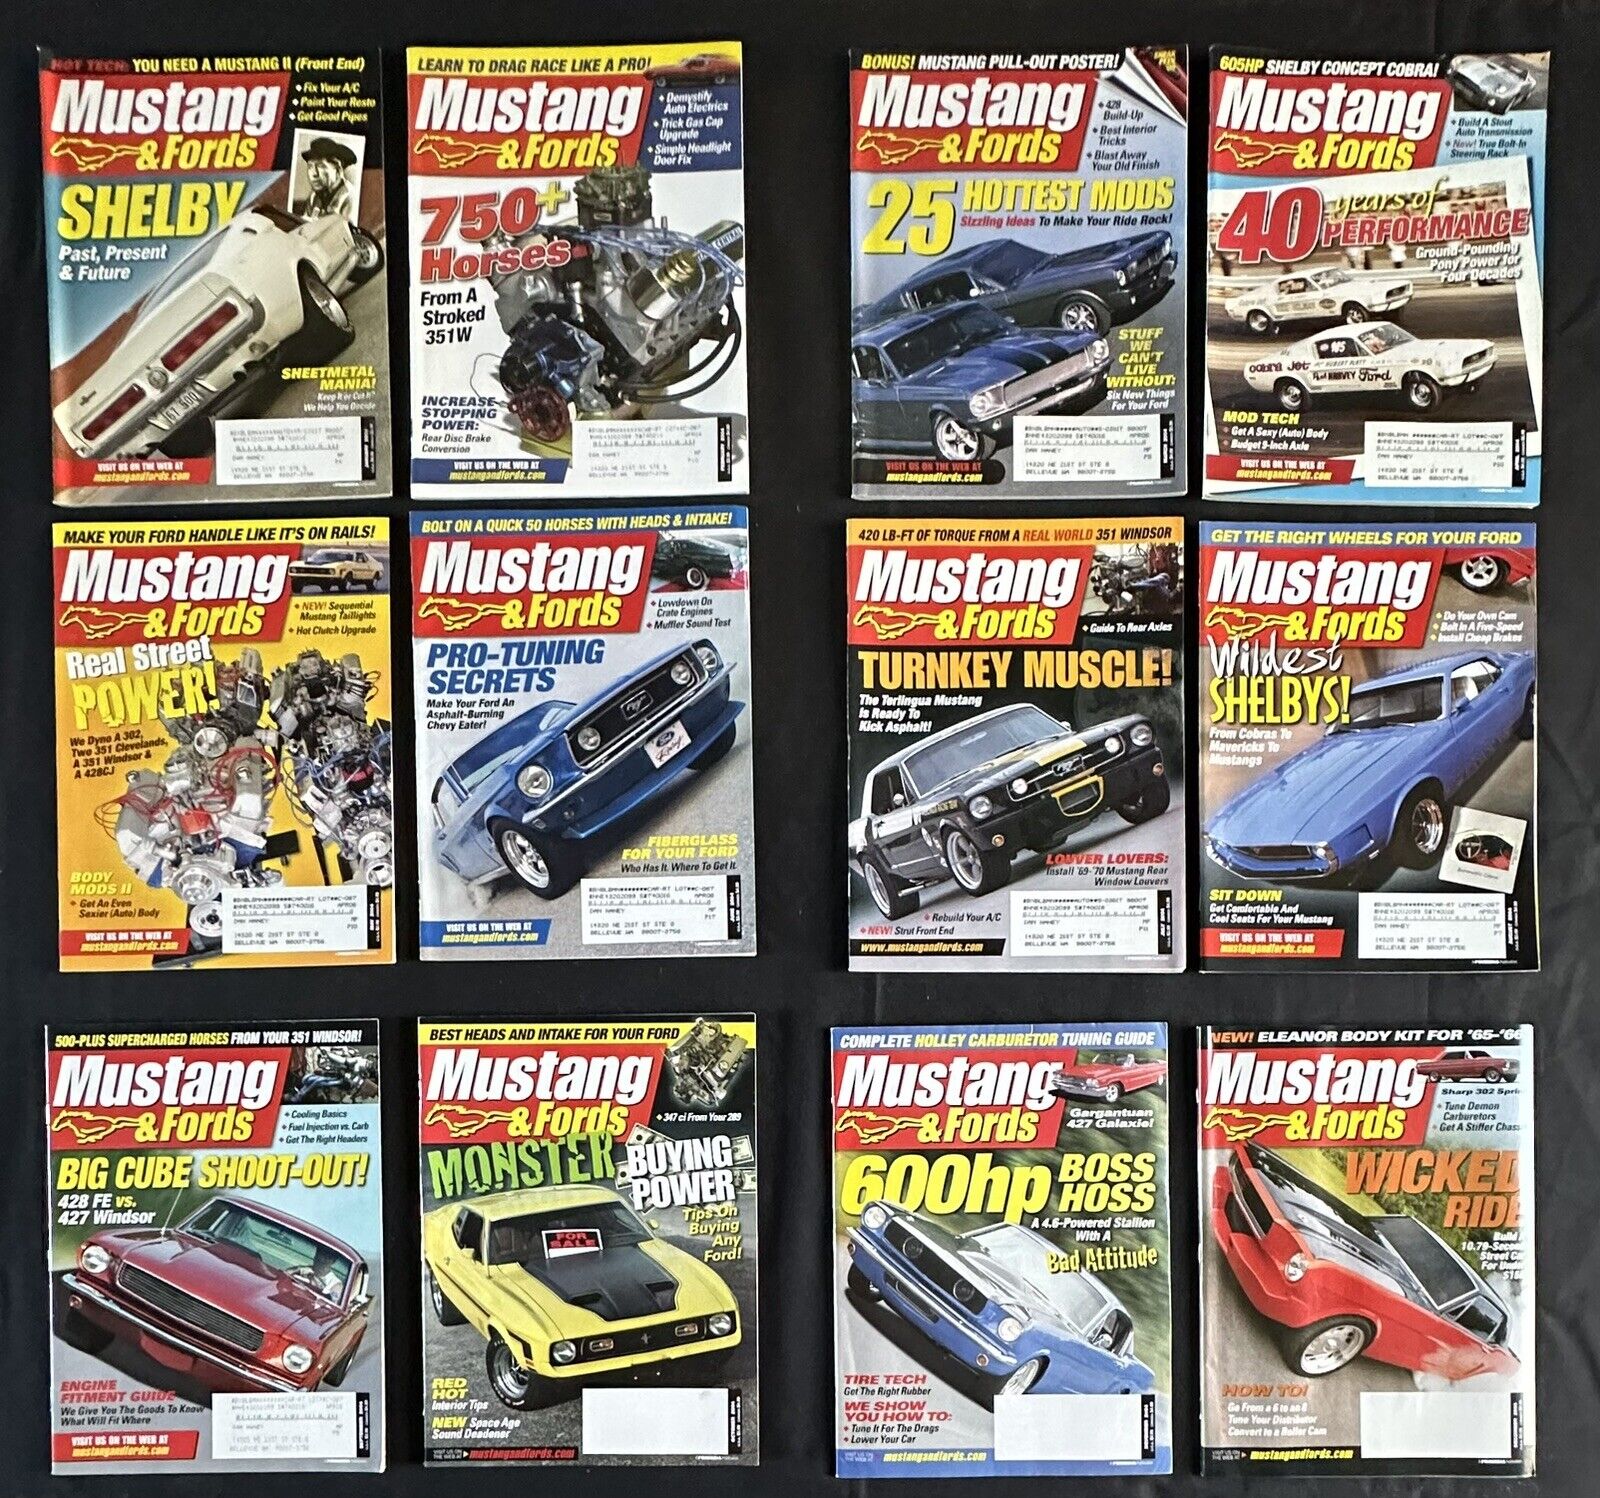 12 2004 Complete Year Mustang & Fords Magazine Shelby 25 Hottest Mods Muscle